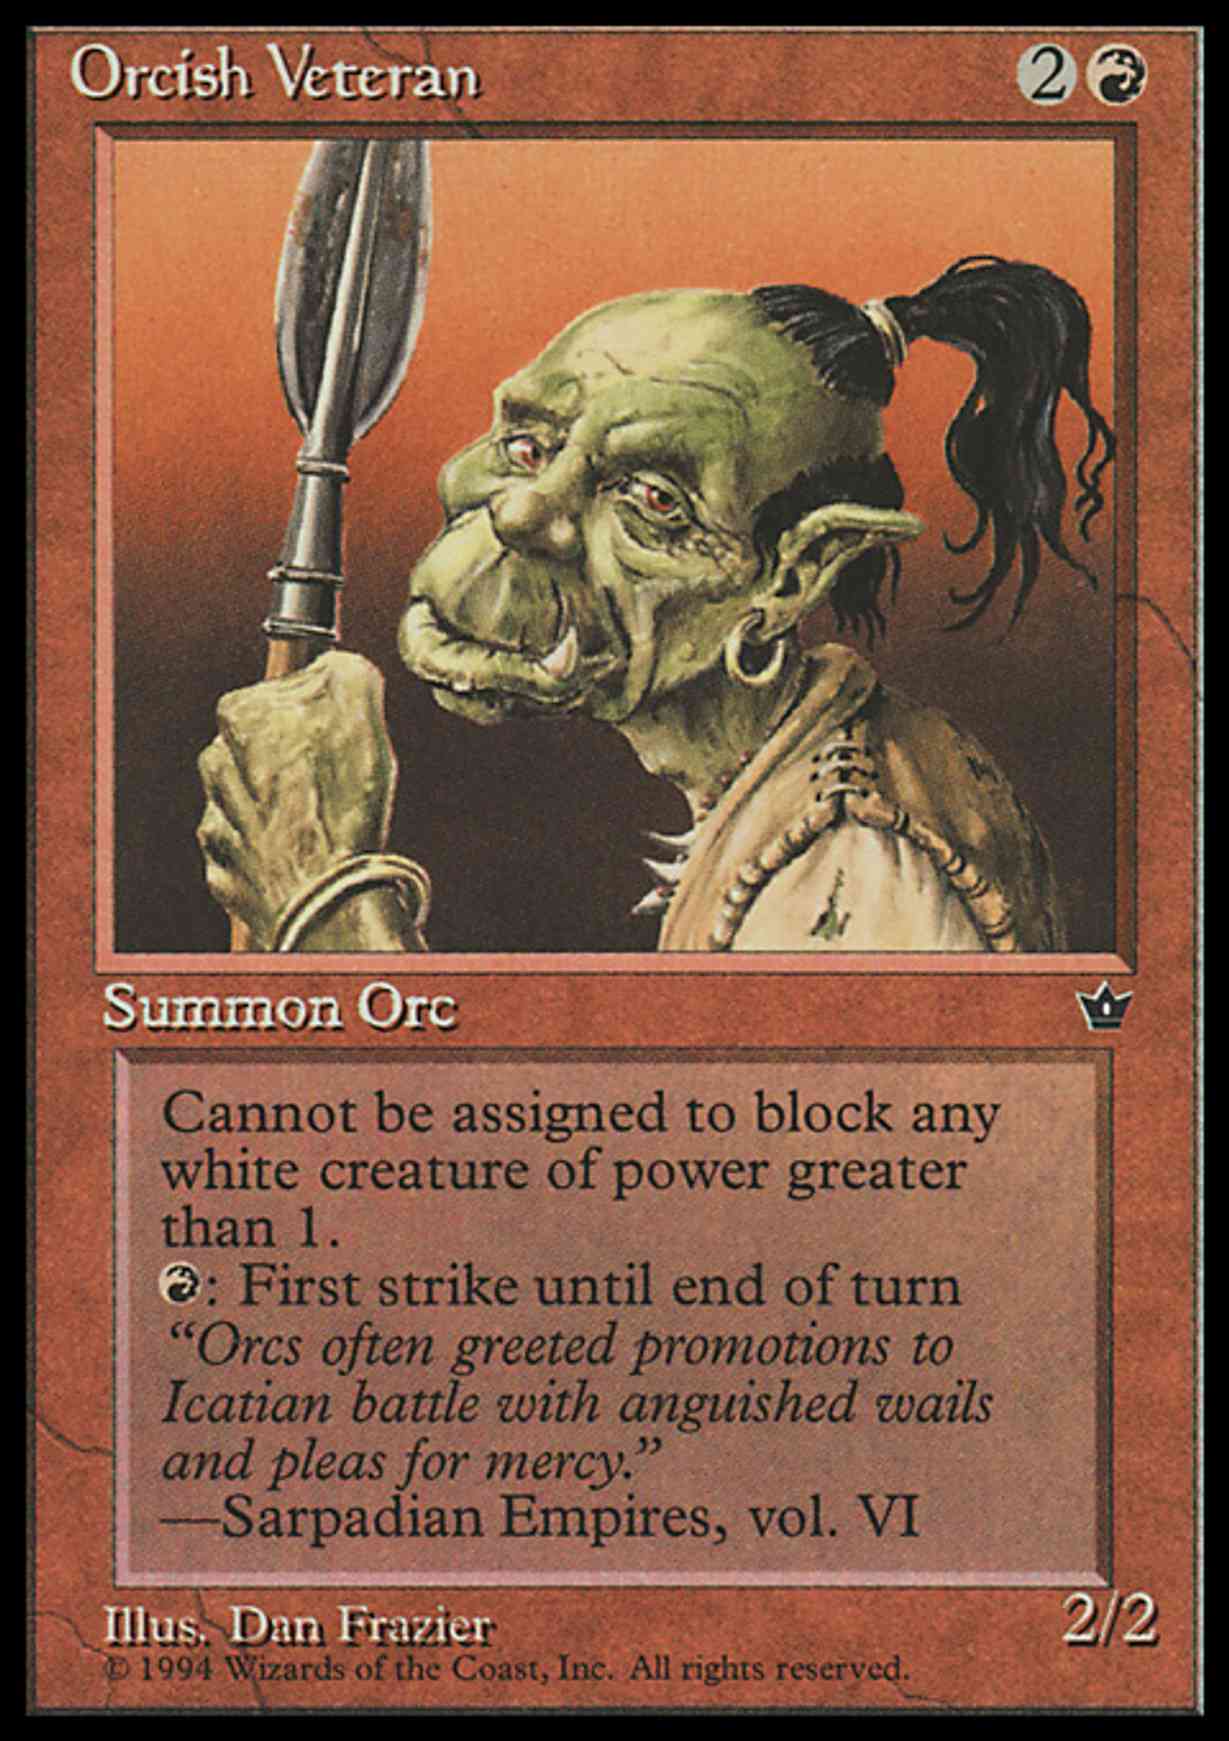 Orcish Veteran (Frazier) magic card front